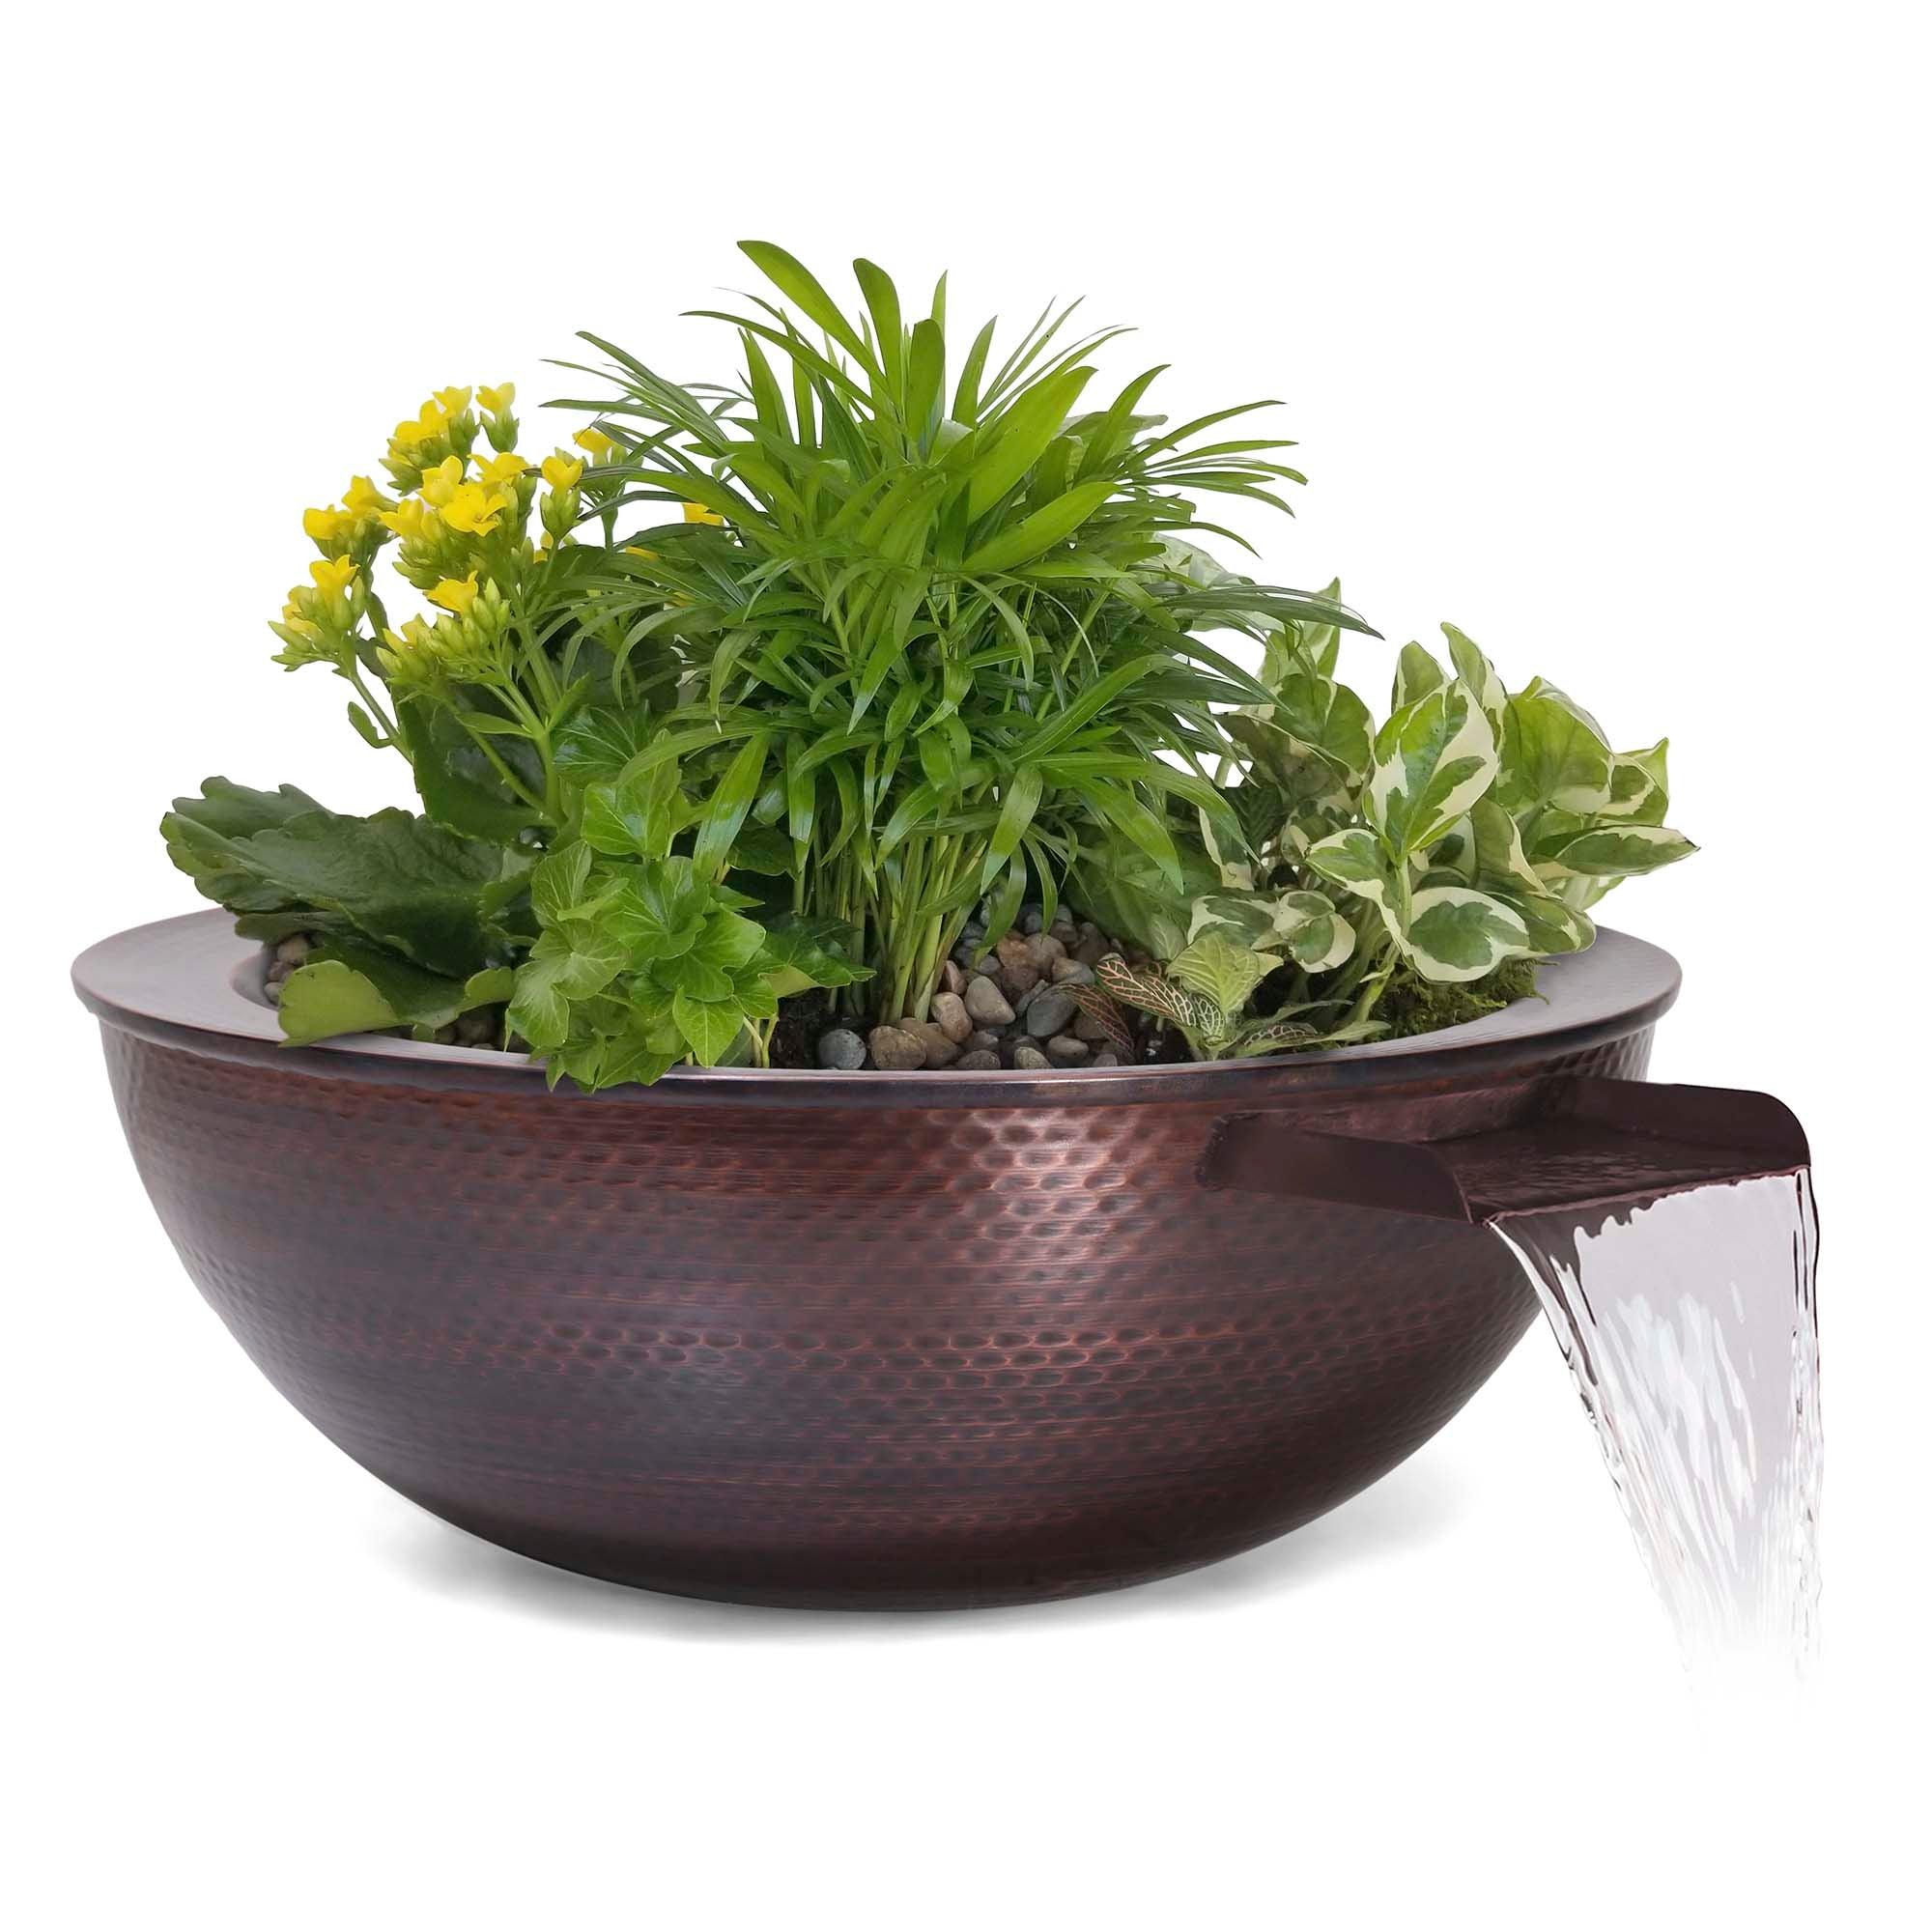 The Outdoor Plus Sedona Planter and Water Bowl - Hammered Copper